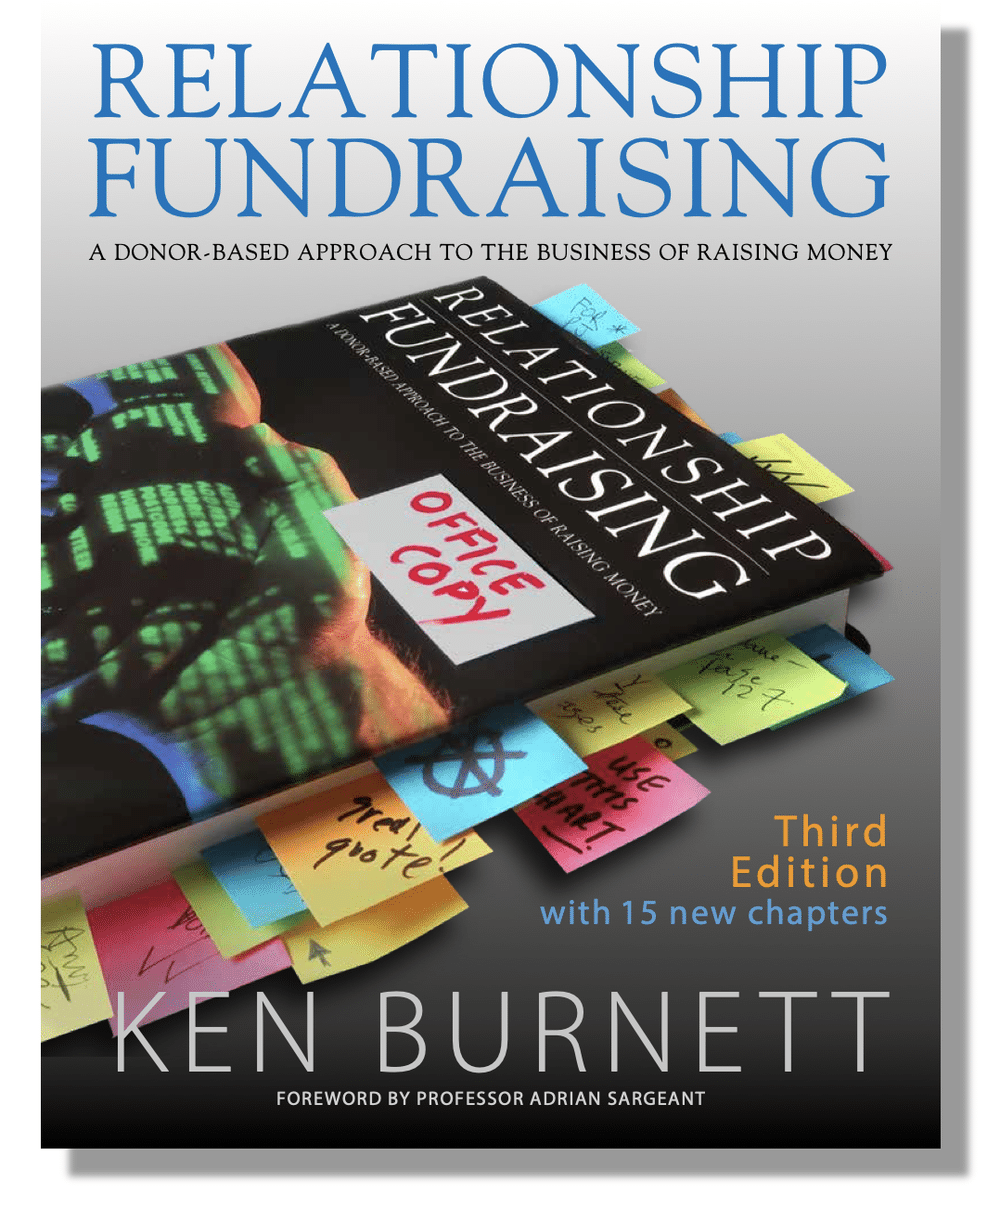 Front cover of the third edition of Relationship Fundraising by Ken Burnett